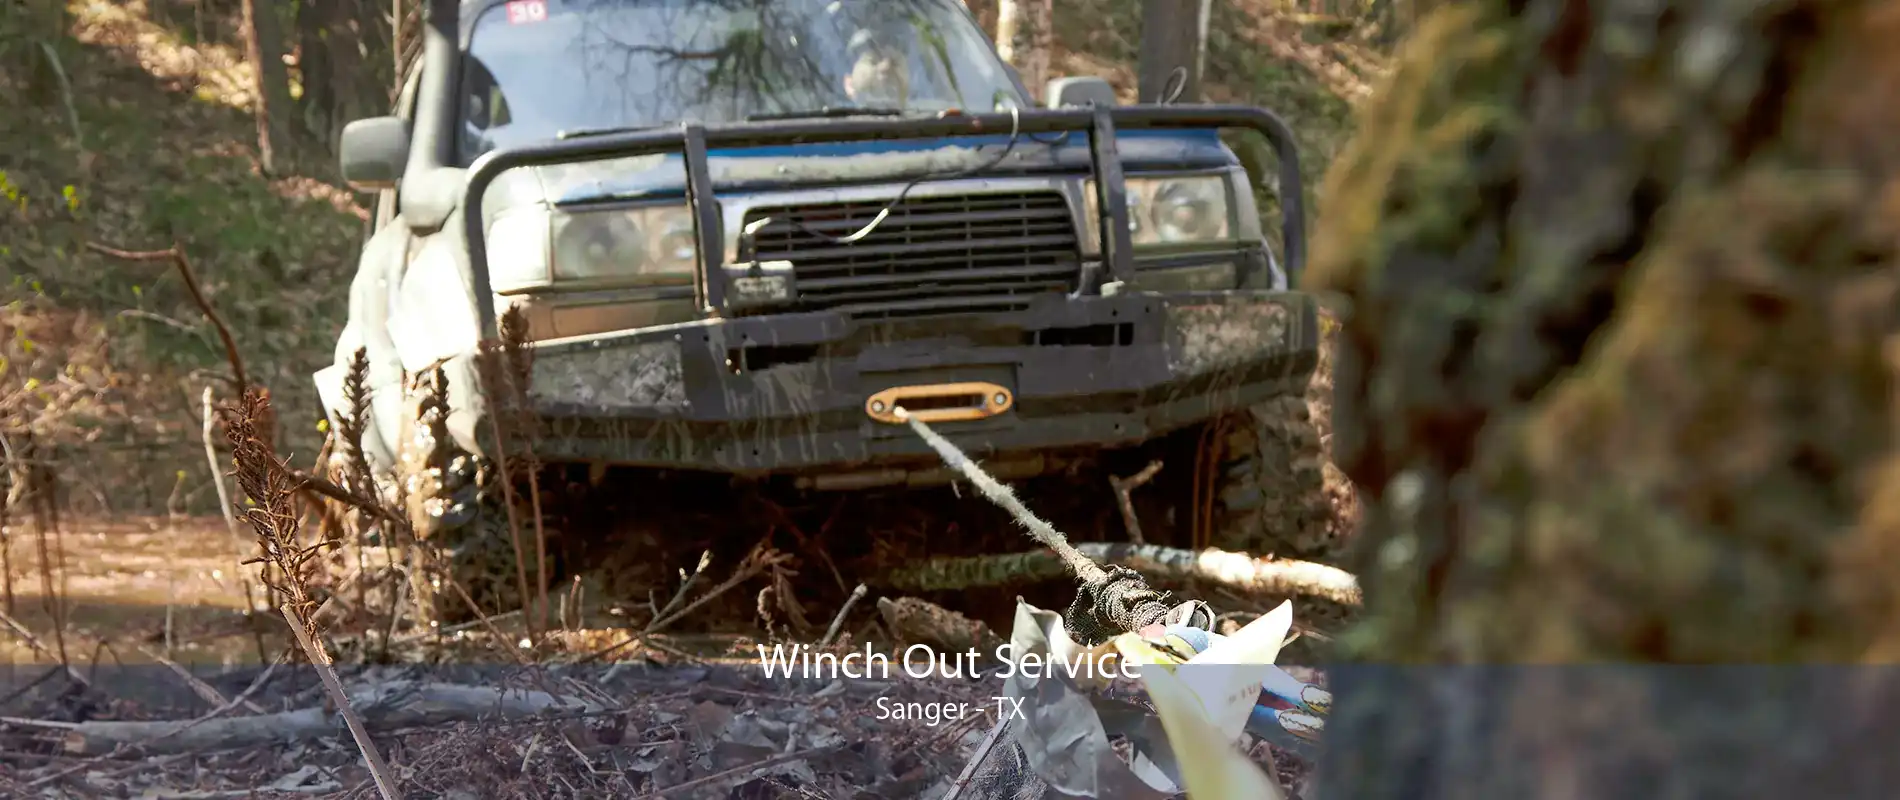 Winch Out Service Sanger - TX